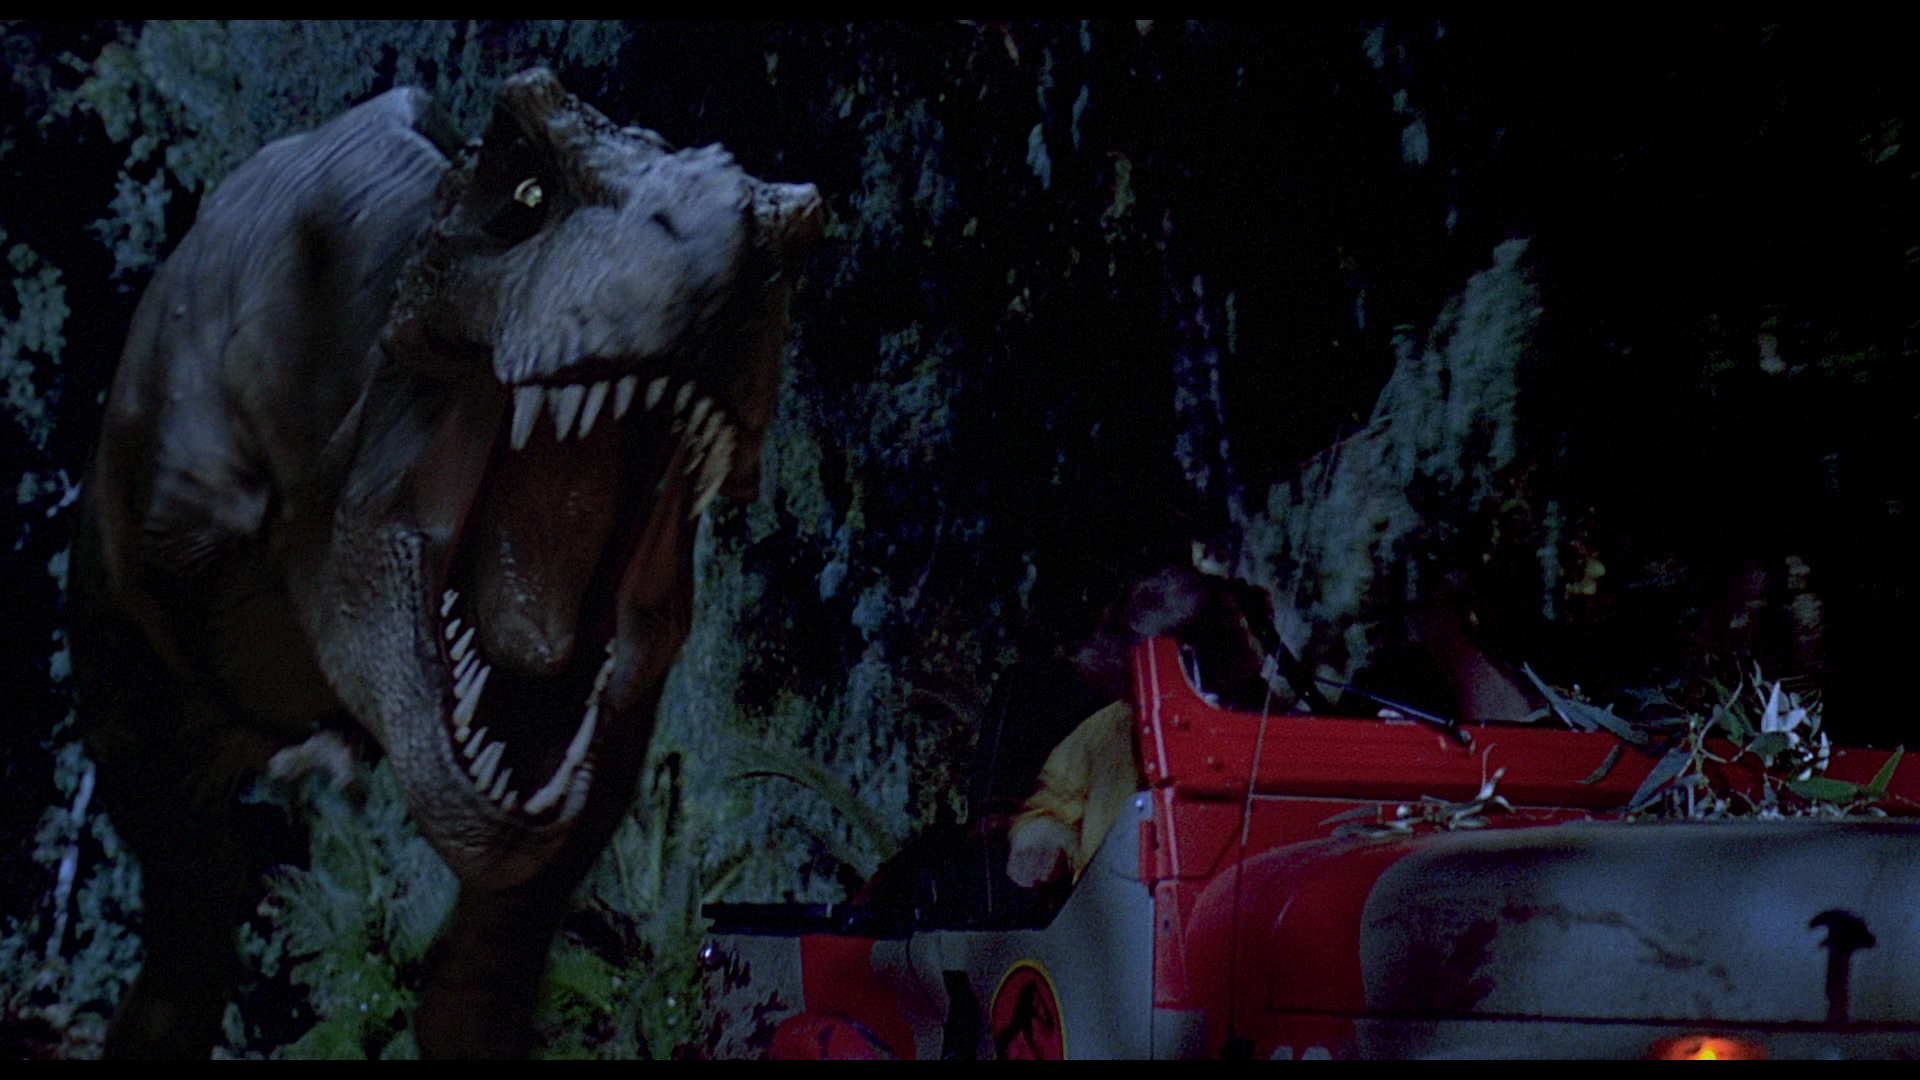 Jurassic Park / The T Rex Chasing The Jeep Took Some Engineering